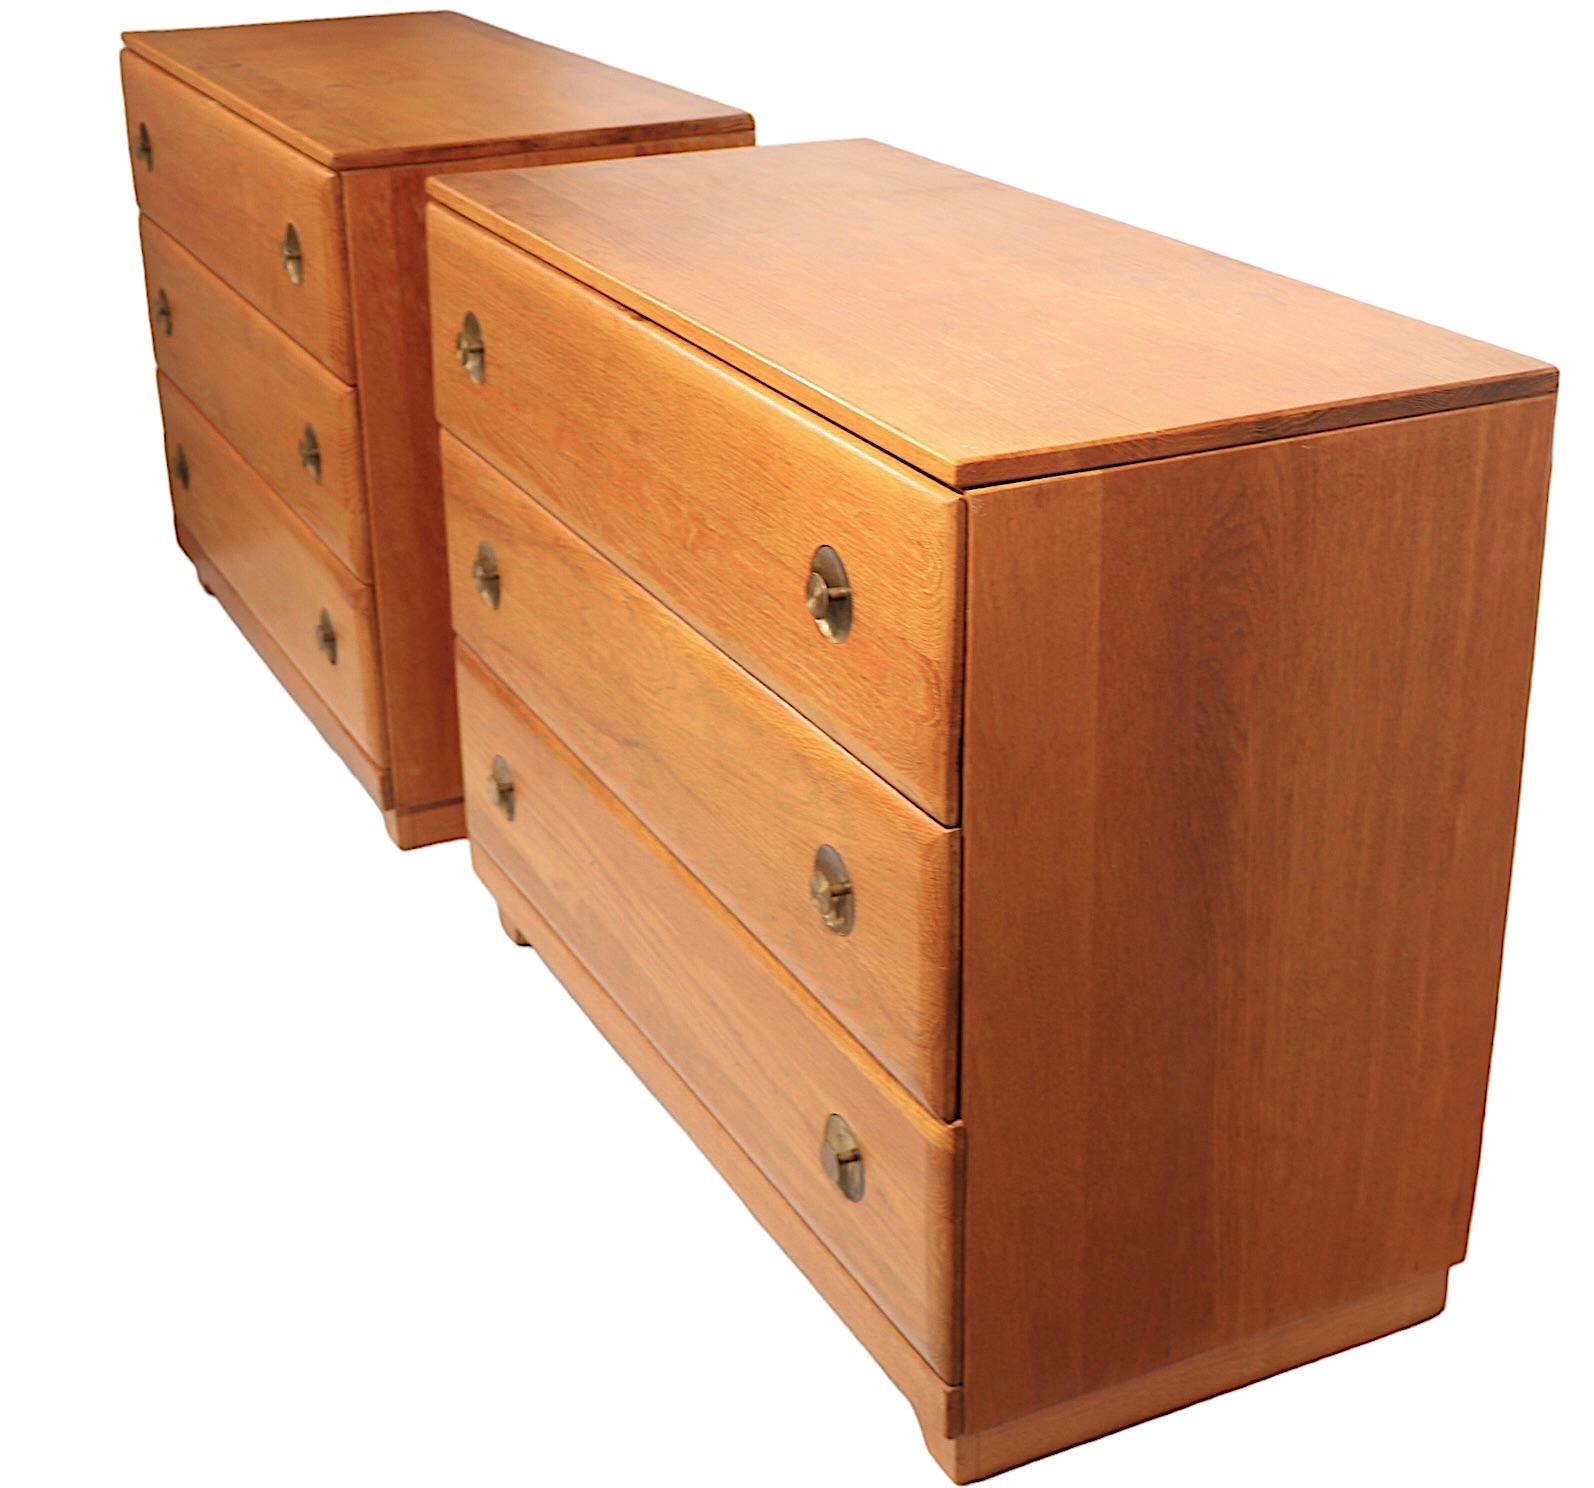 Sophisticated mid century bachelors chests, in original cerused oak finish, with recessed brass pulls. Each chest has three deep drawers, both are in very good, clean, original, ready to use condition, showing only light cosmetic wear, normal and